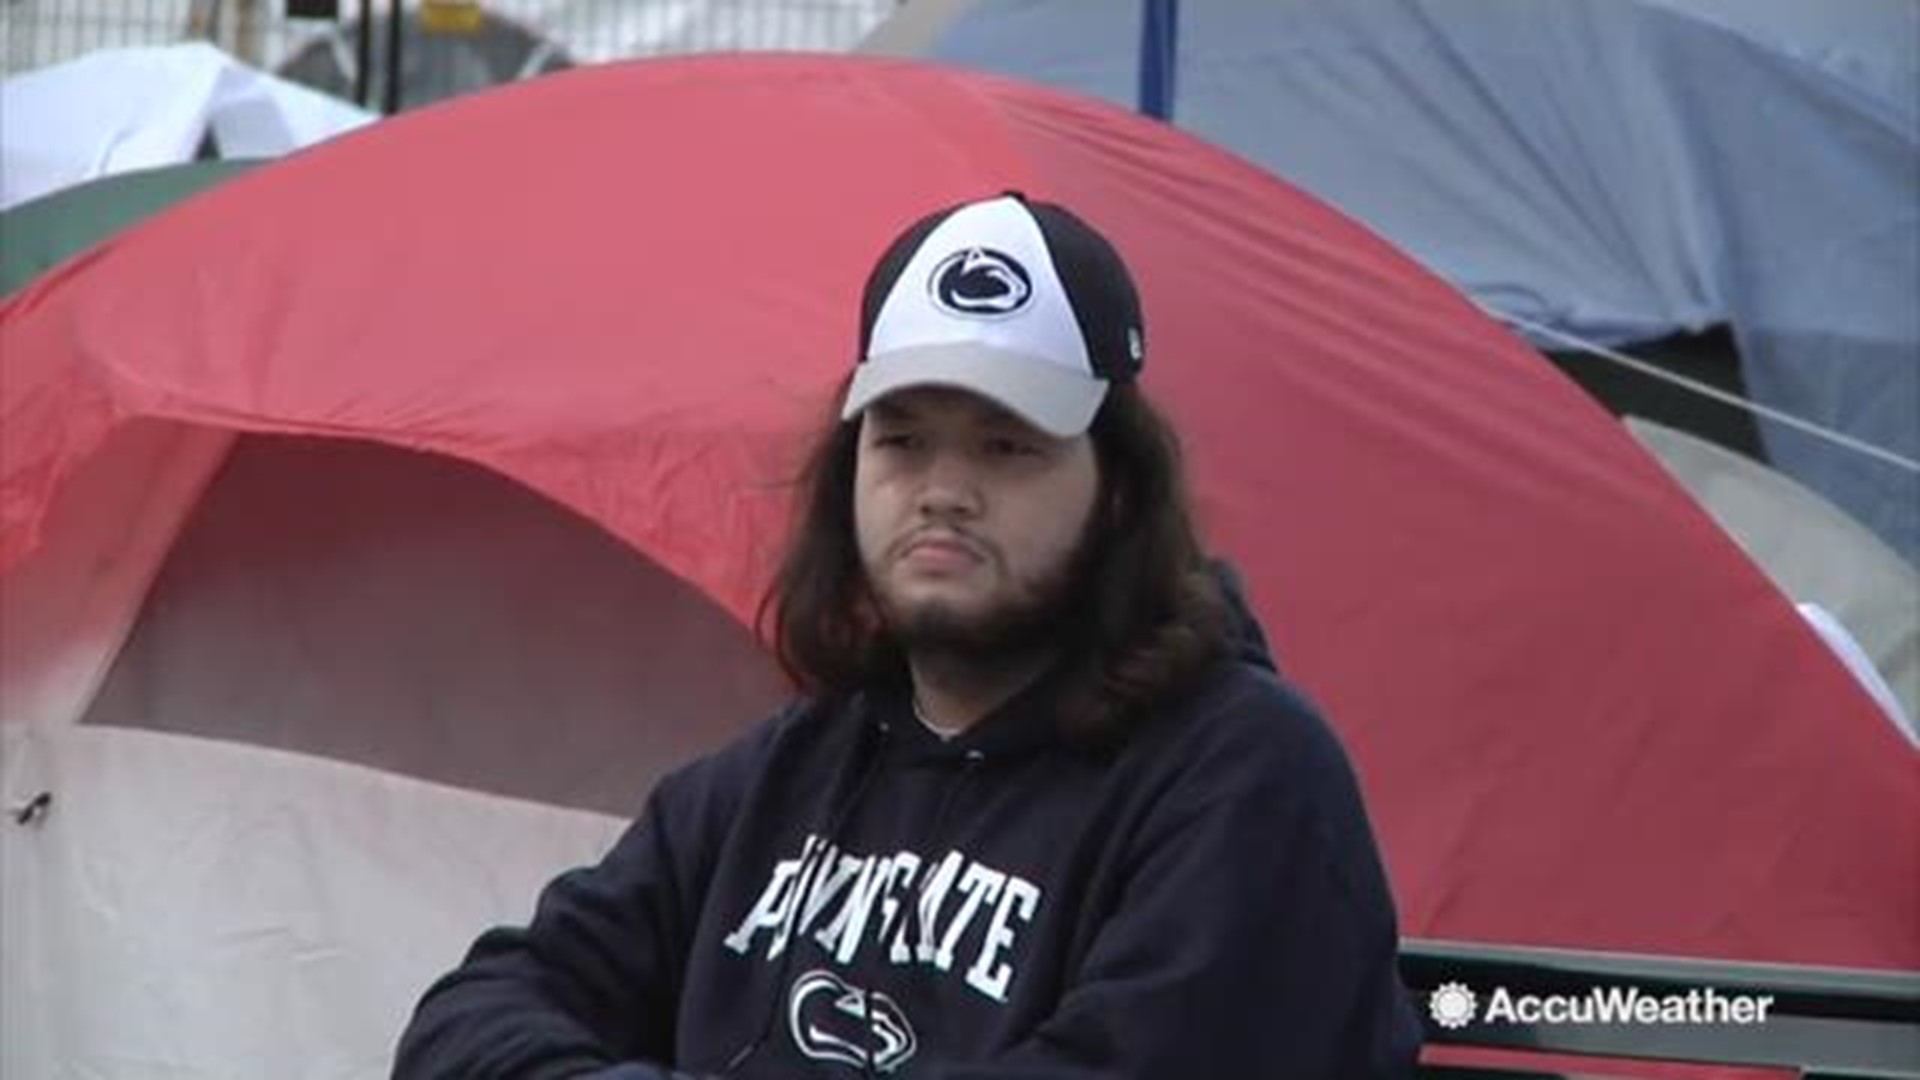 Every year, Penn State hosts an annual Whiteout game.  And in anticipation, students would camp outside the stadium and create a tent village dubbed 'Nittanyville.'  This year, they had to brave the elements including heavy rainfall as they wait for the s